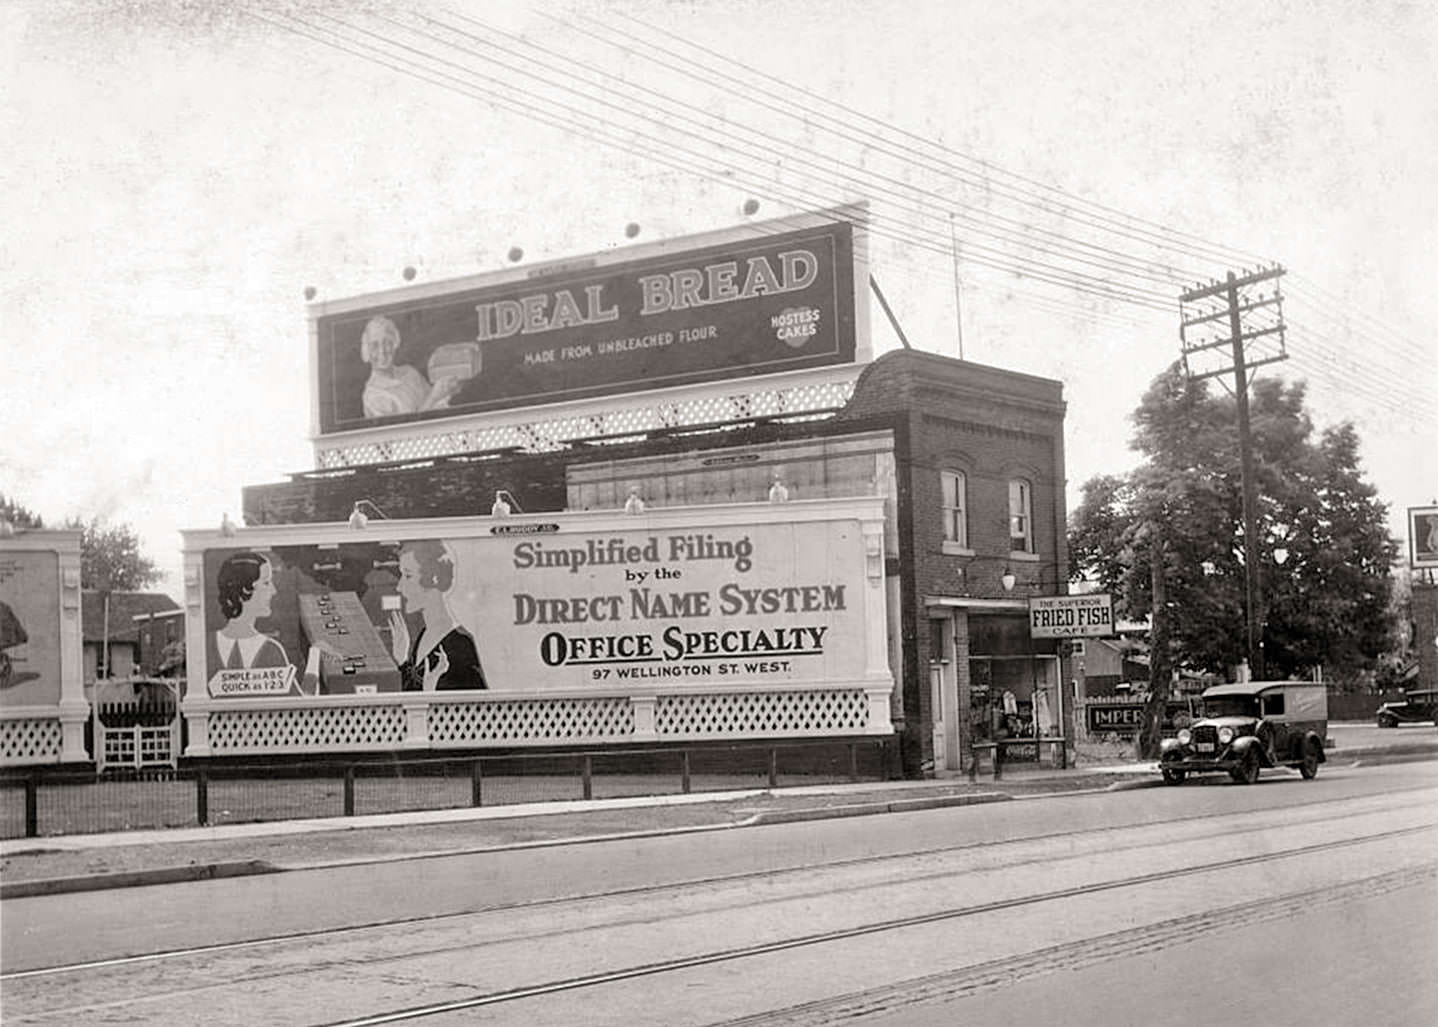 Looking south east to The Superior Fried Fish Café, 1887 Yonge Street, 1930